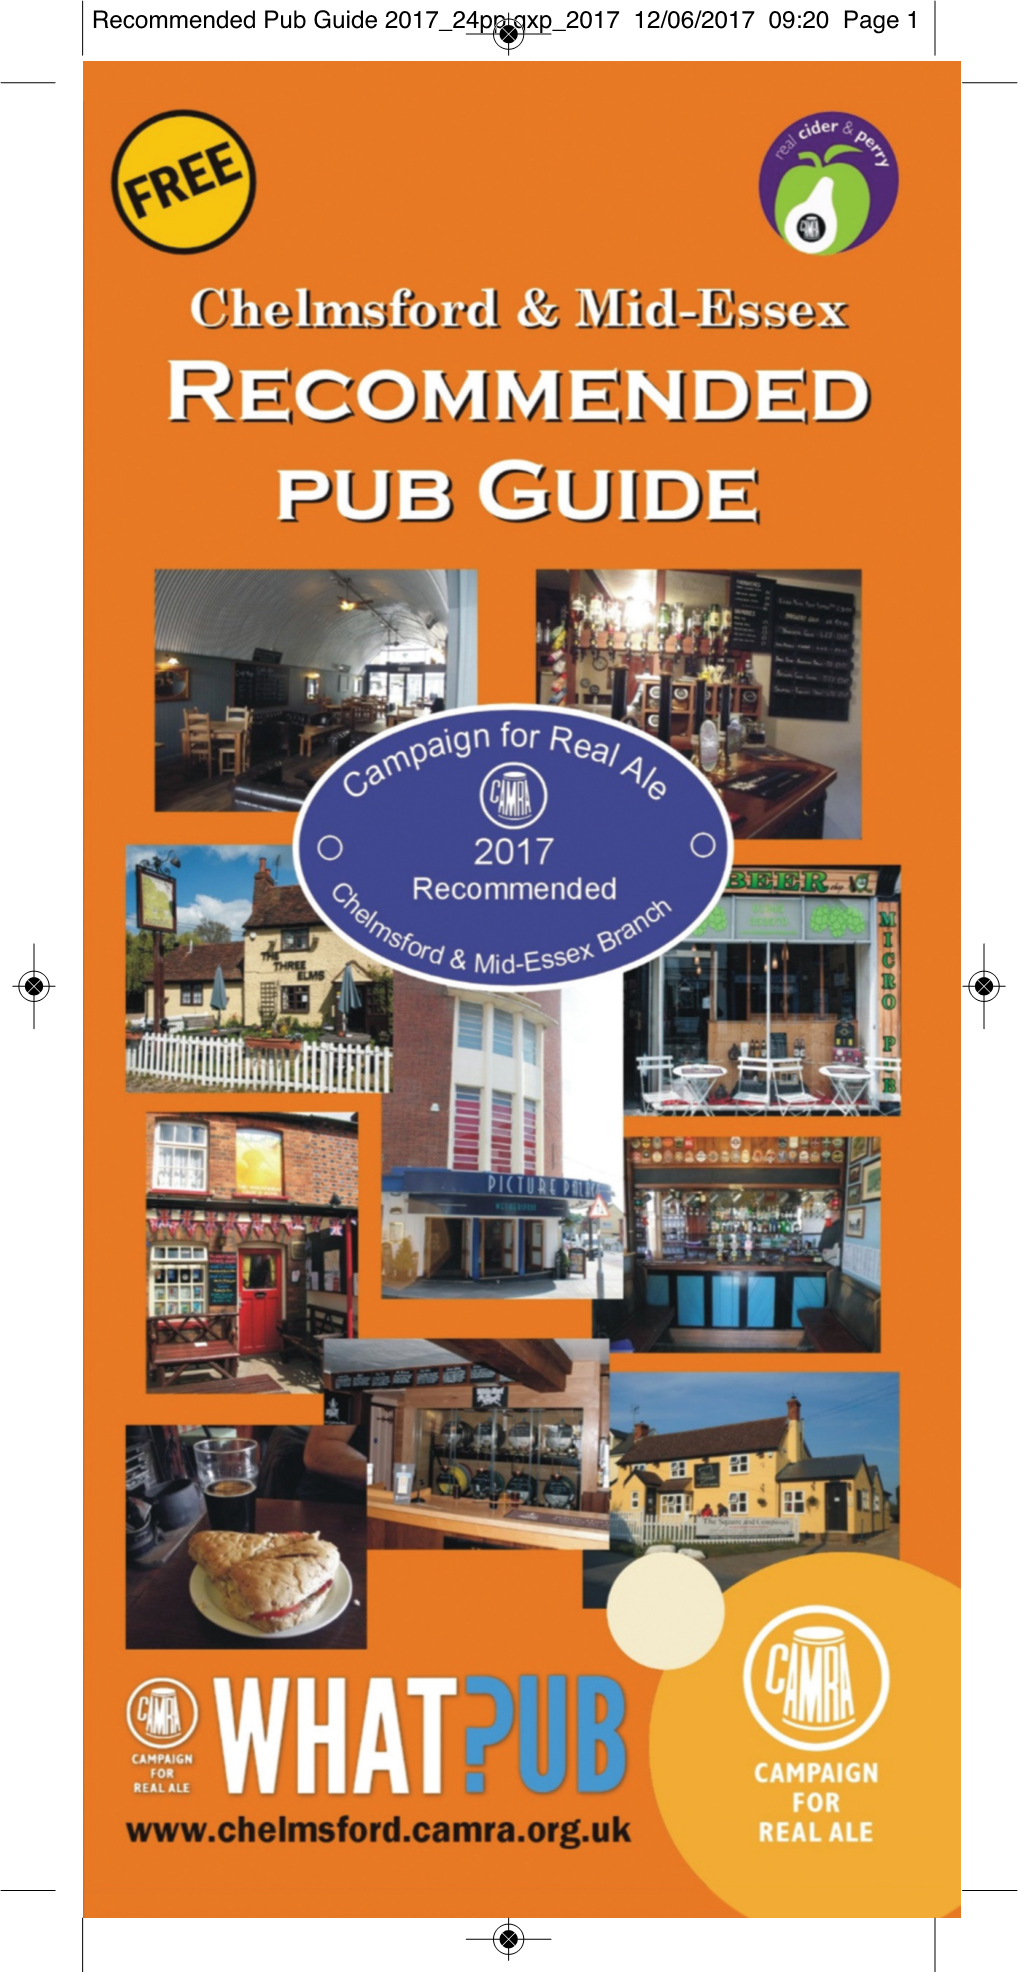 Recommended Pub Guide 2017 24Pp.Qxp 2017 12/06/2017 09:20 Page 1 Recommended Pub Guide 2017 24Pp.Qxp 2017 12/06/2017 09:20 Page 2